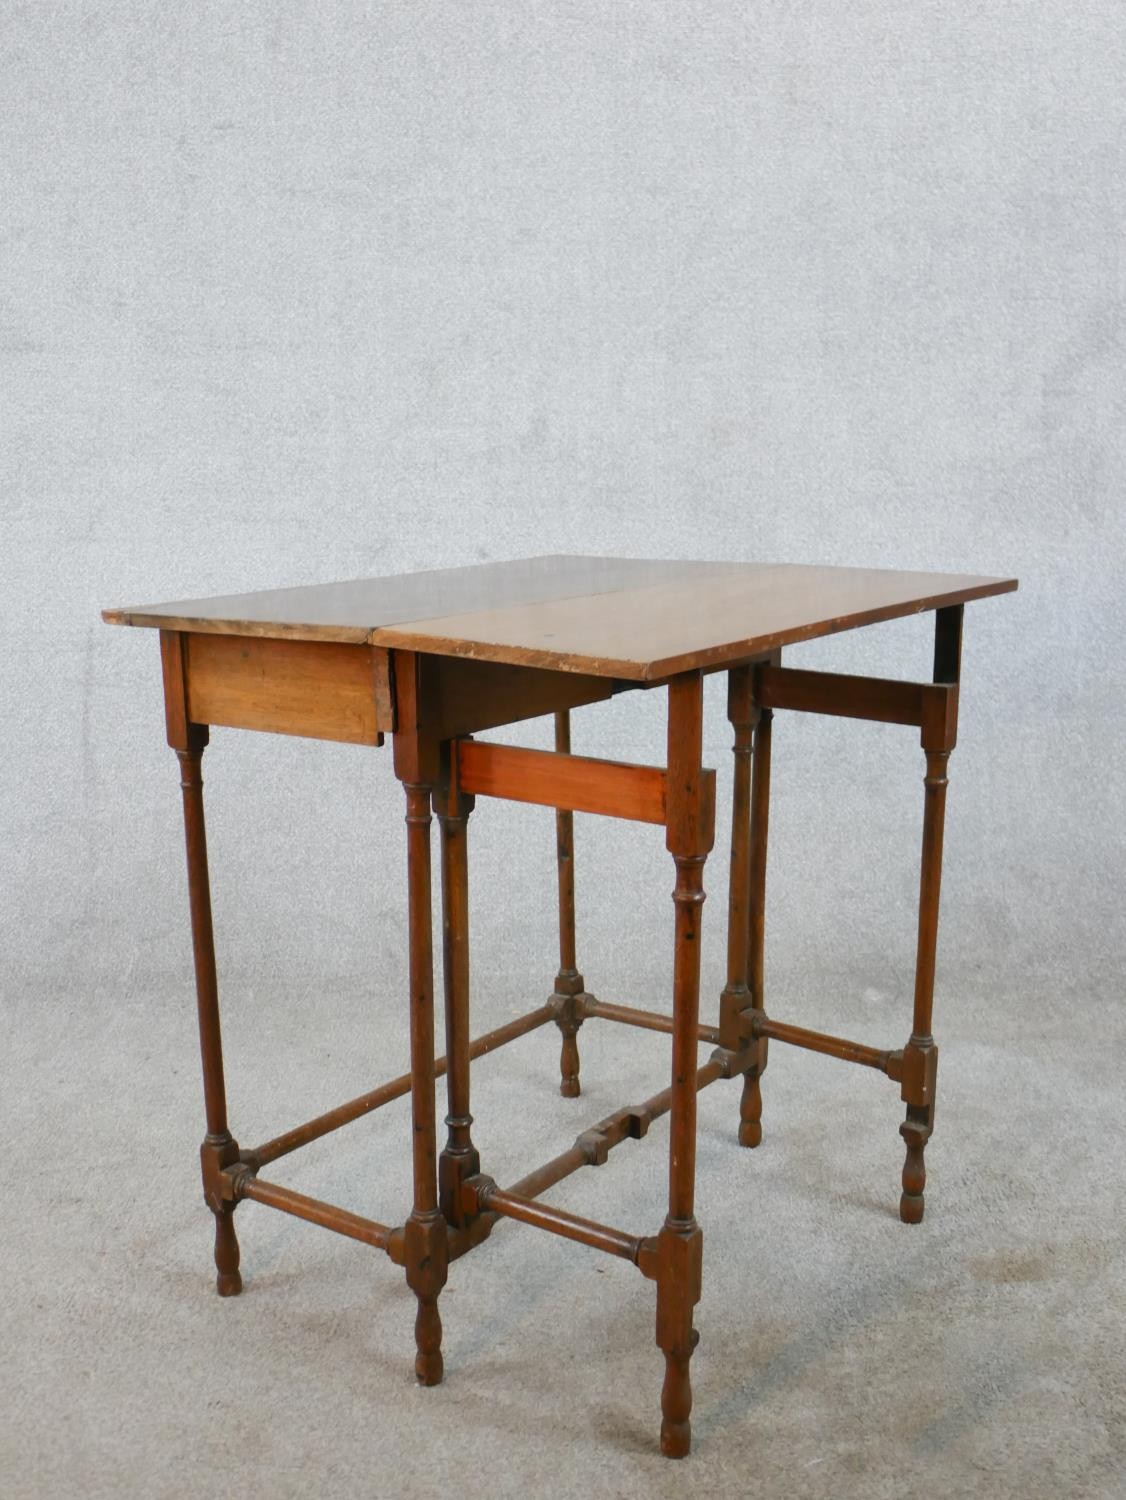 A 19th century mahogany drop leaf gate leg table raised on slender spider leg supports. H.71 W.71 - Image 5 of 5